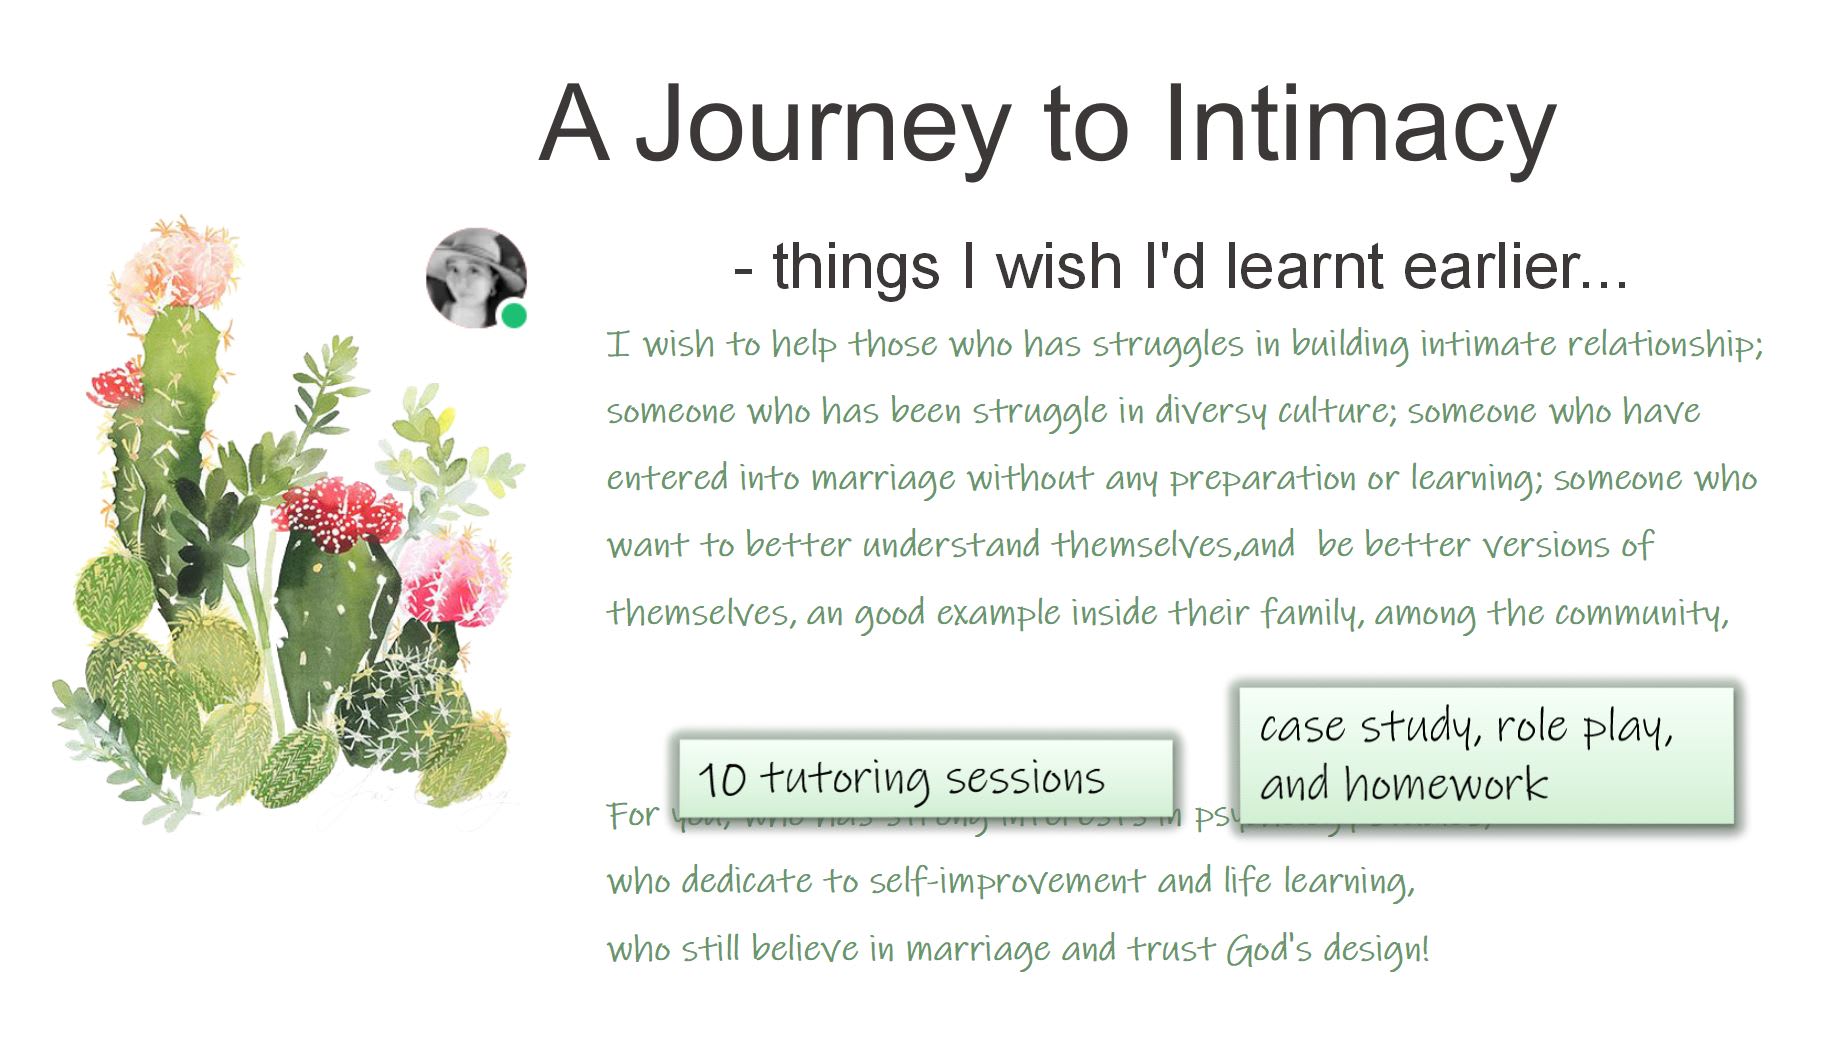 The Intimate Relationship Journal